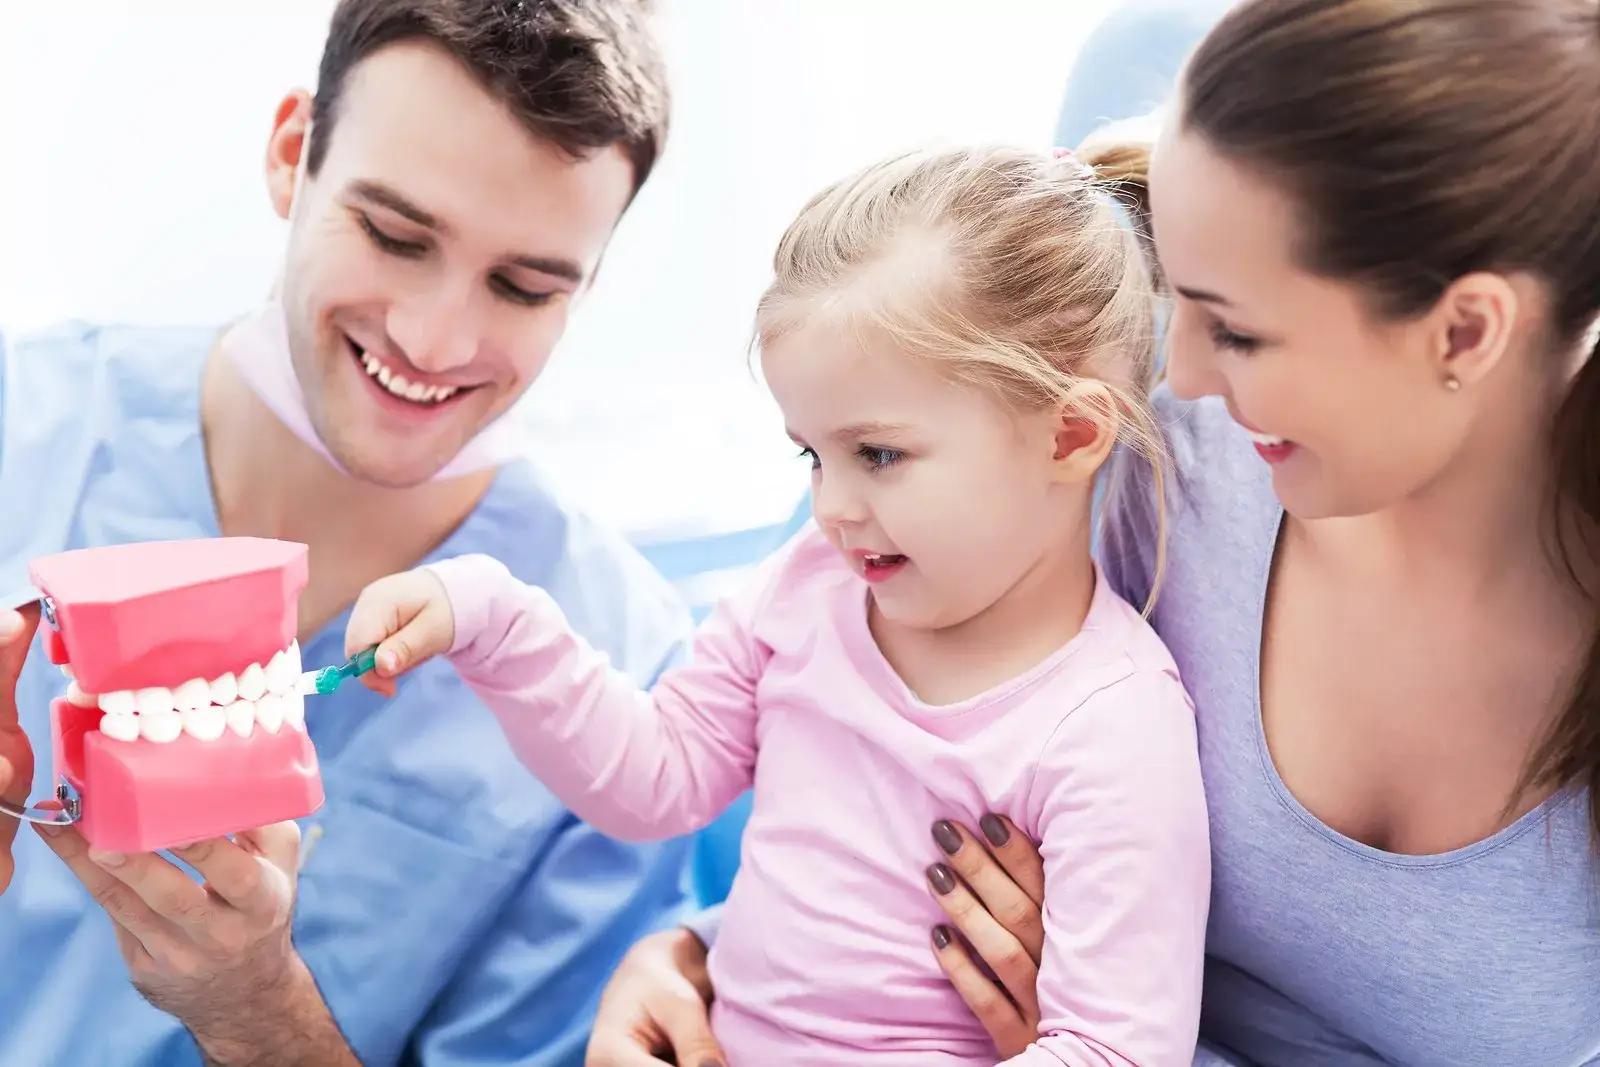 Mother & Pediatric Dentist in Dental Office with Diagram of Teeth Teaching Toddler how to Brush - The Super Dentists